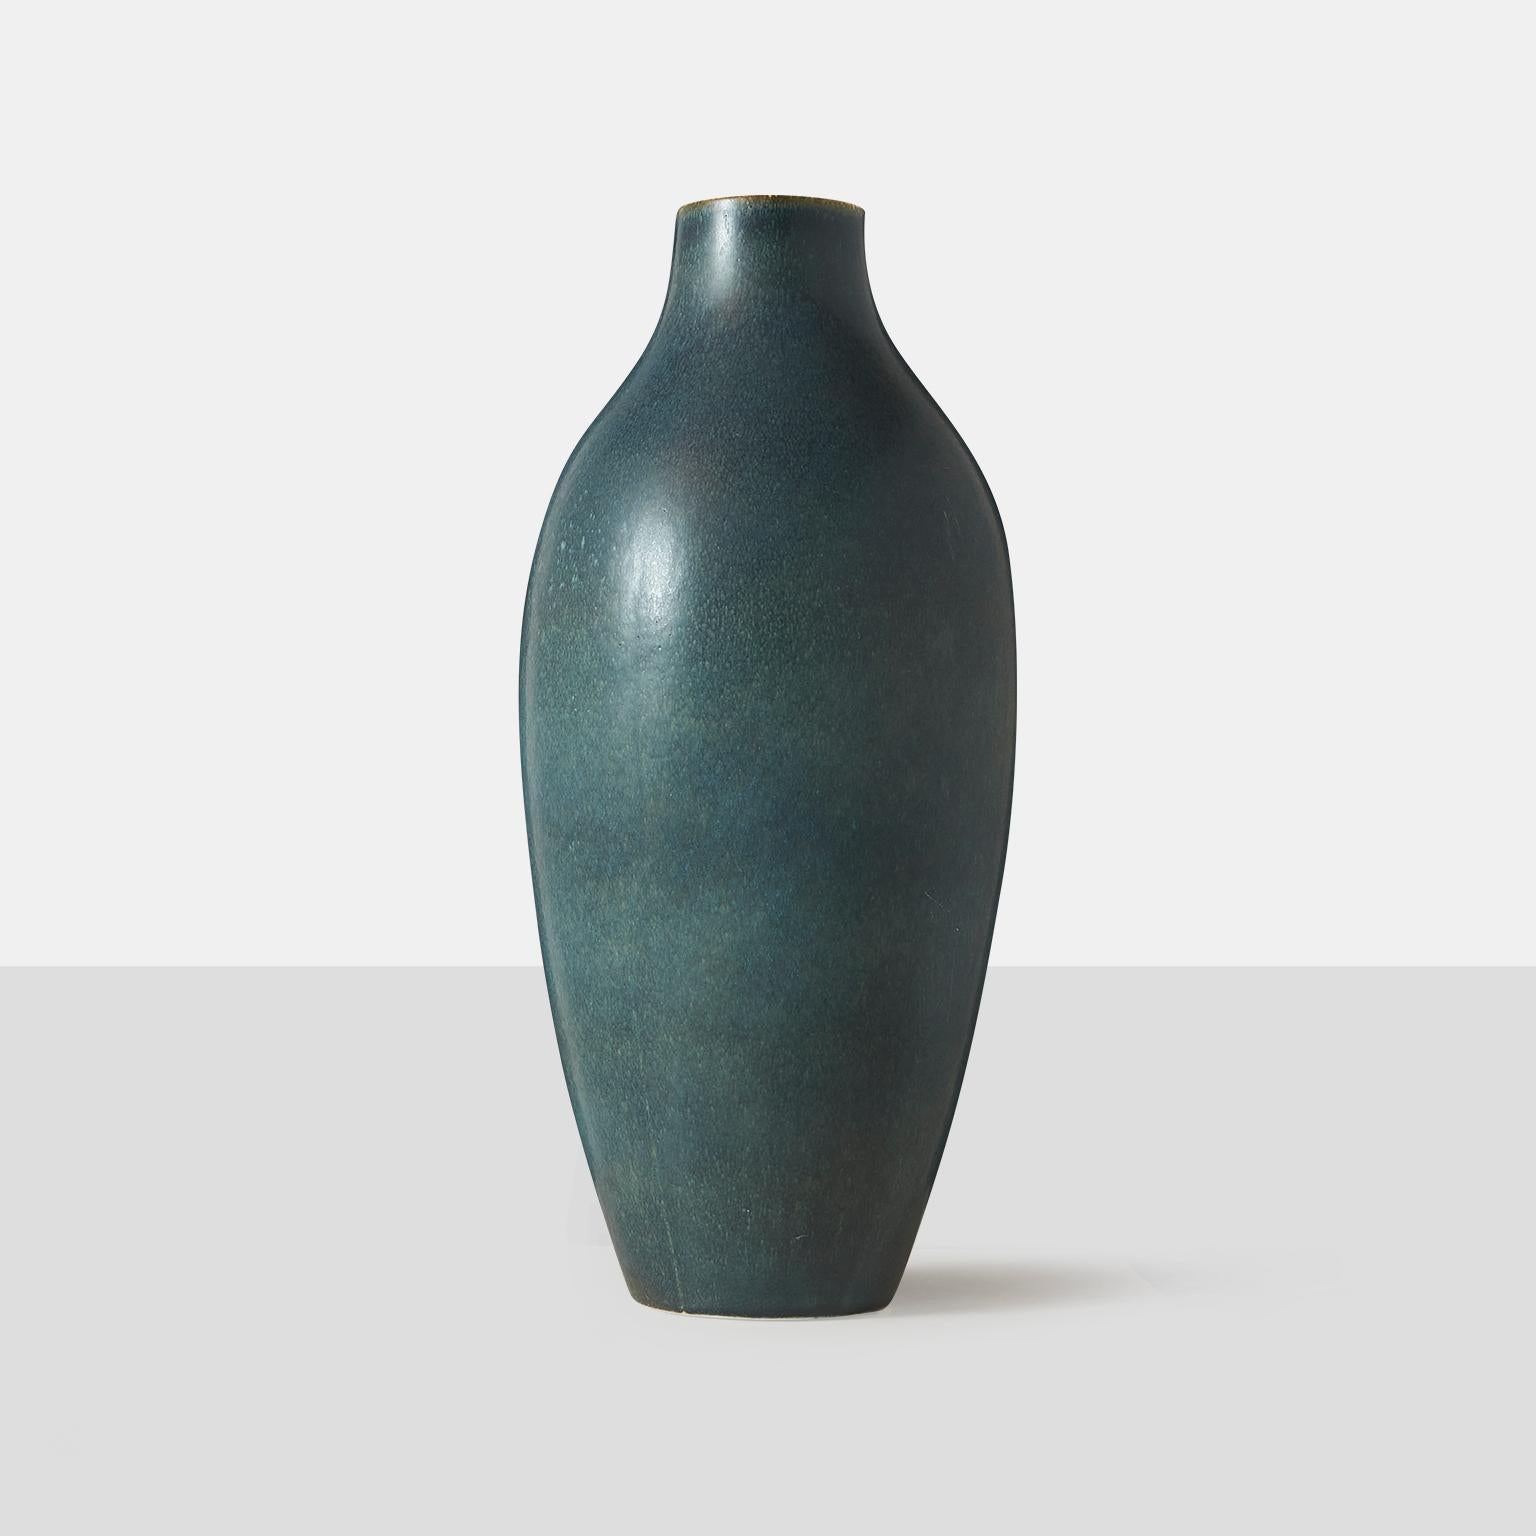 A large scale vase with a hare’s fur glaze in shades of blues and greens by Carl-Harry Stalhane for Rorstrand.
Incised signature and studio mark to underside: [R Sweden CHS SDA].